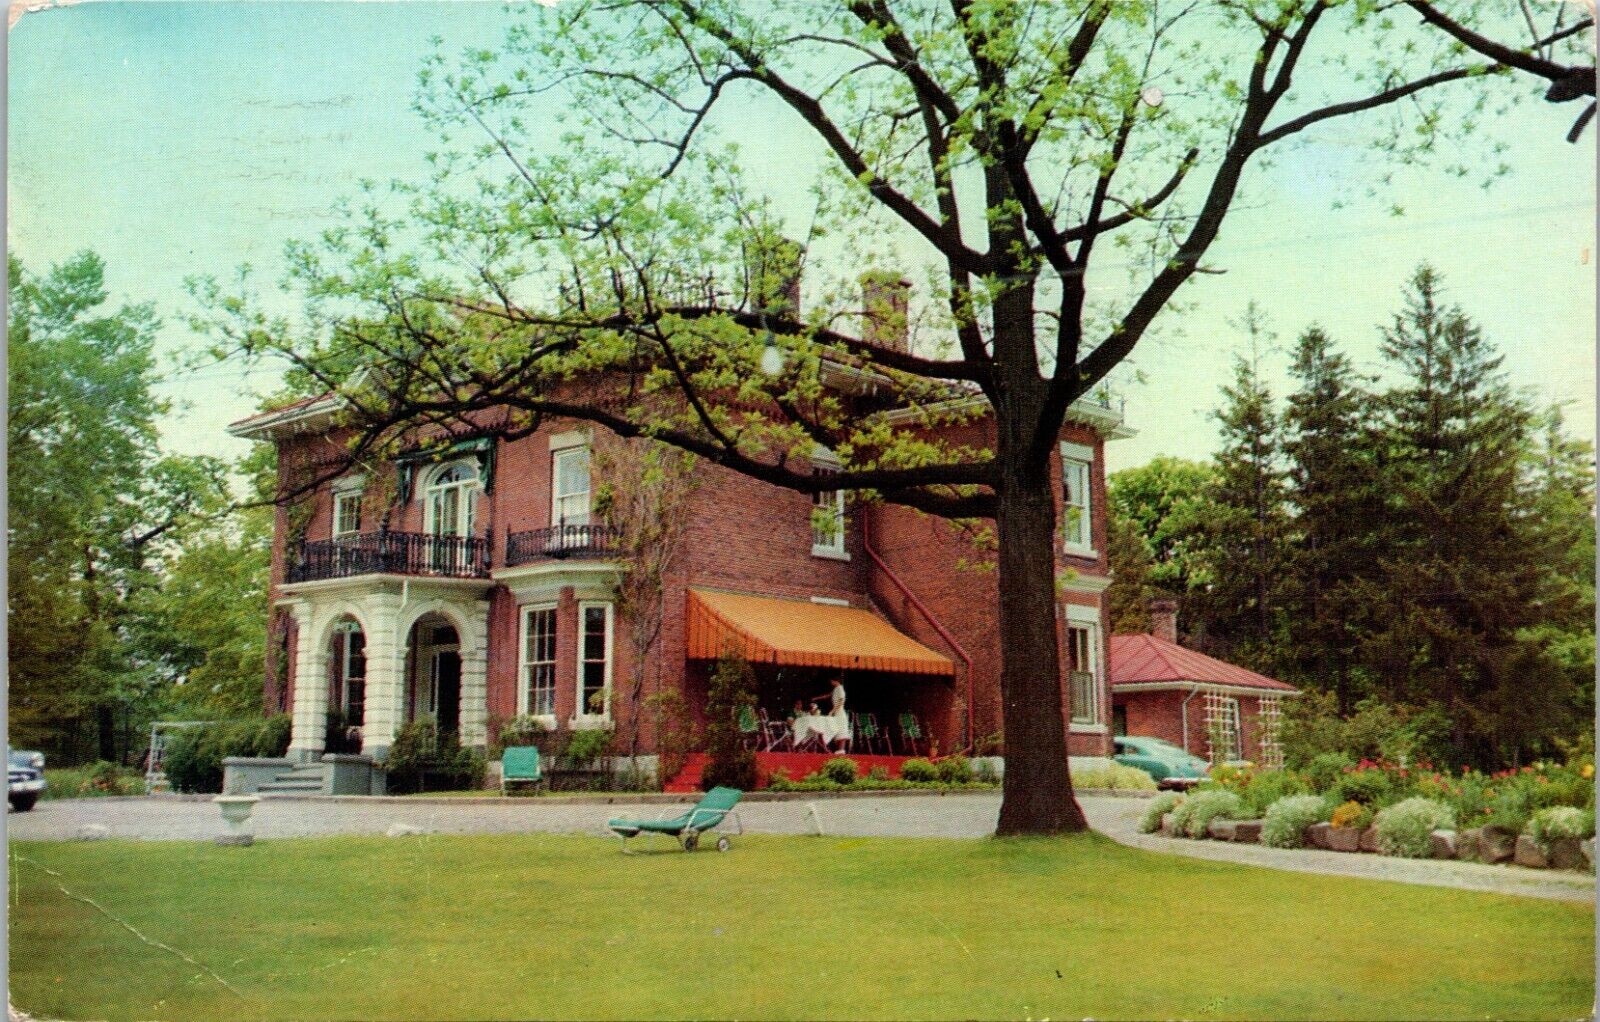 Greenwood Tower Motels And Lodge Port Hope Ontario Canada Postcard L66